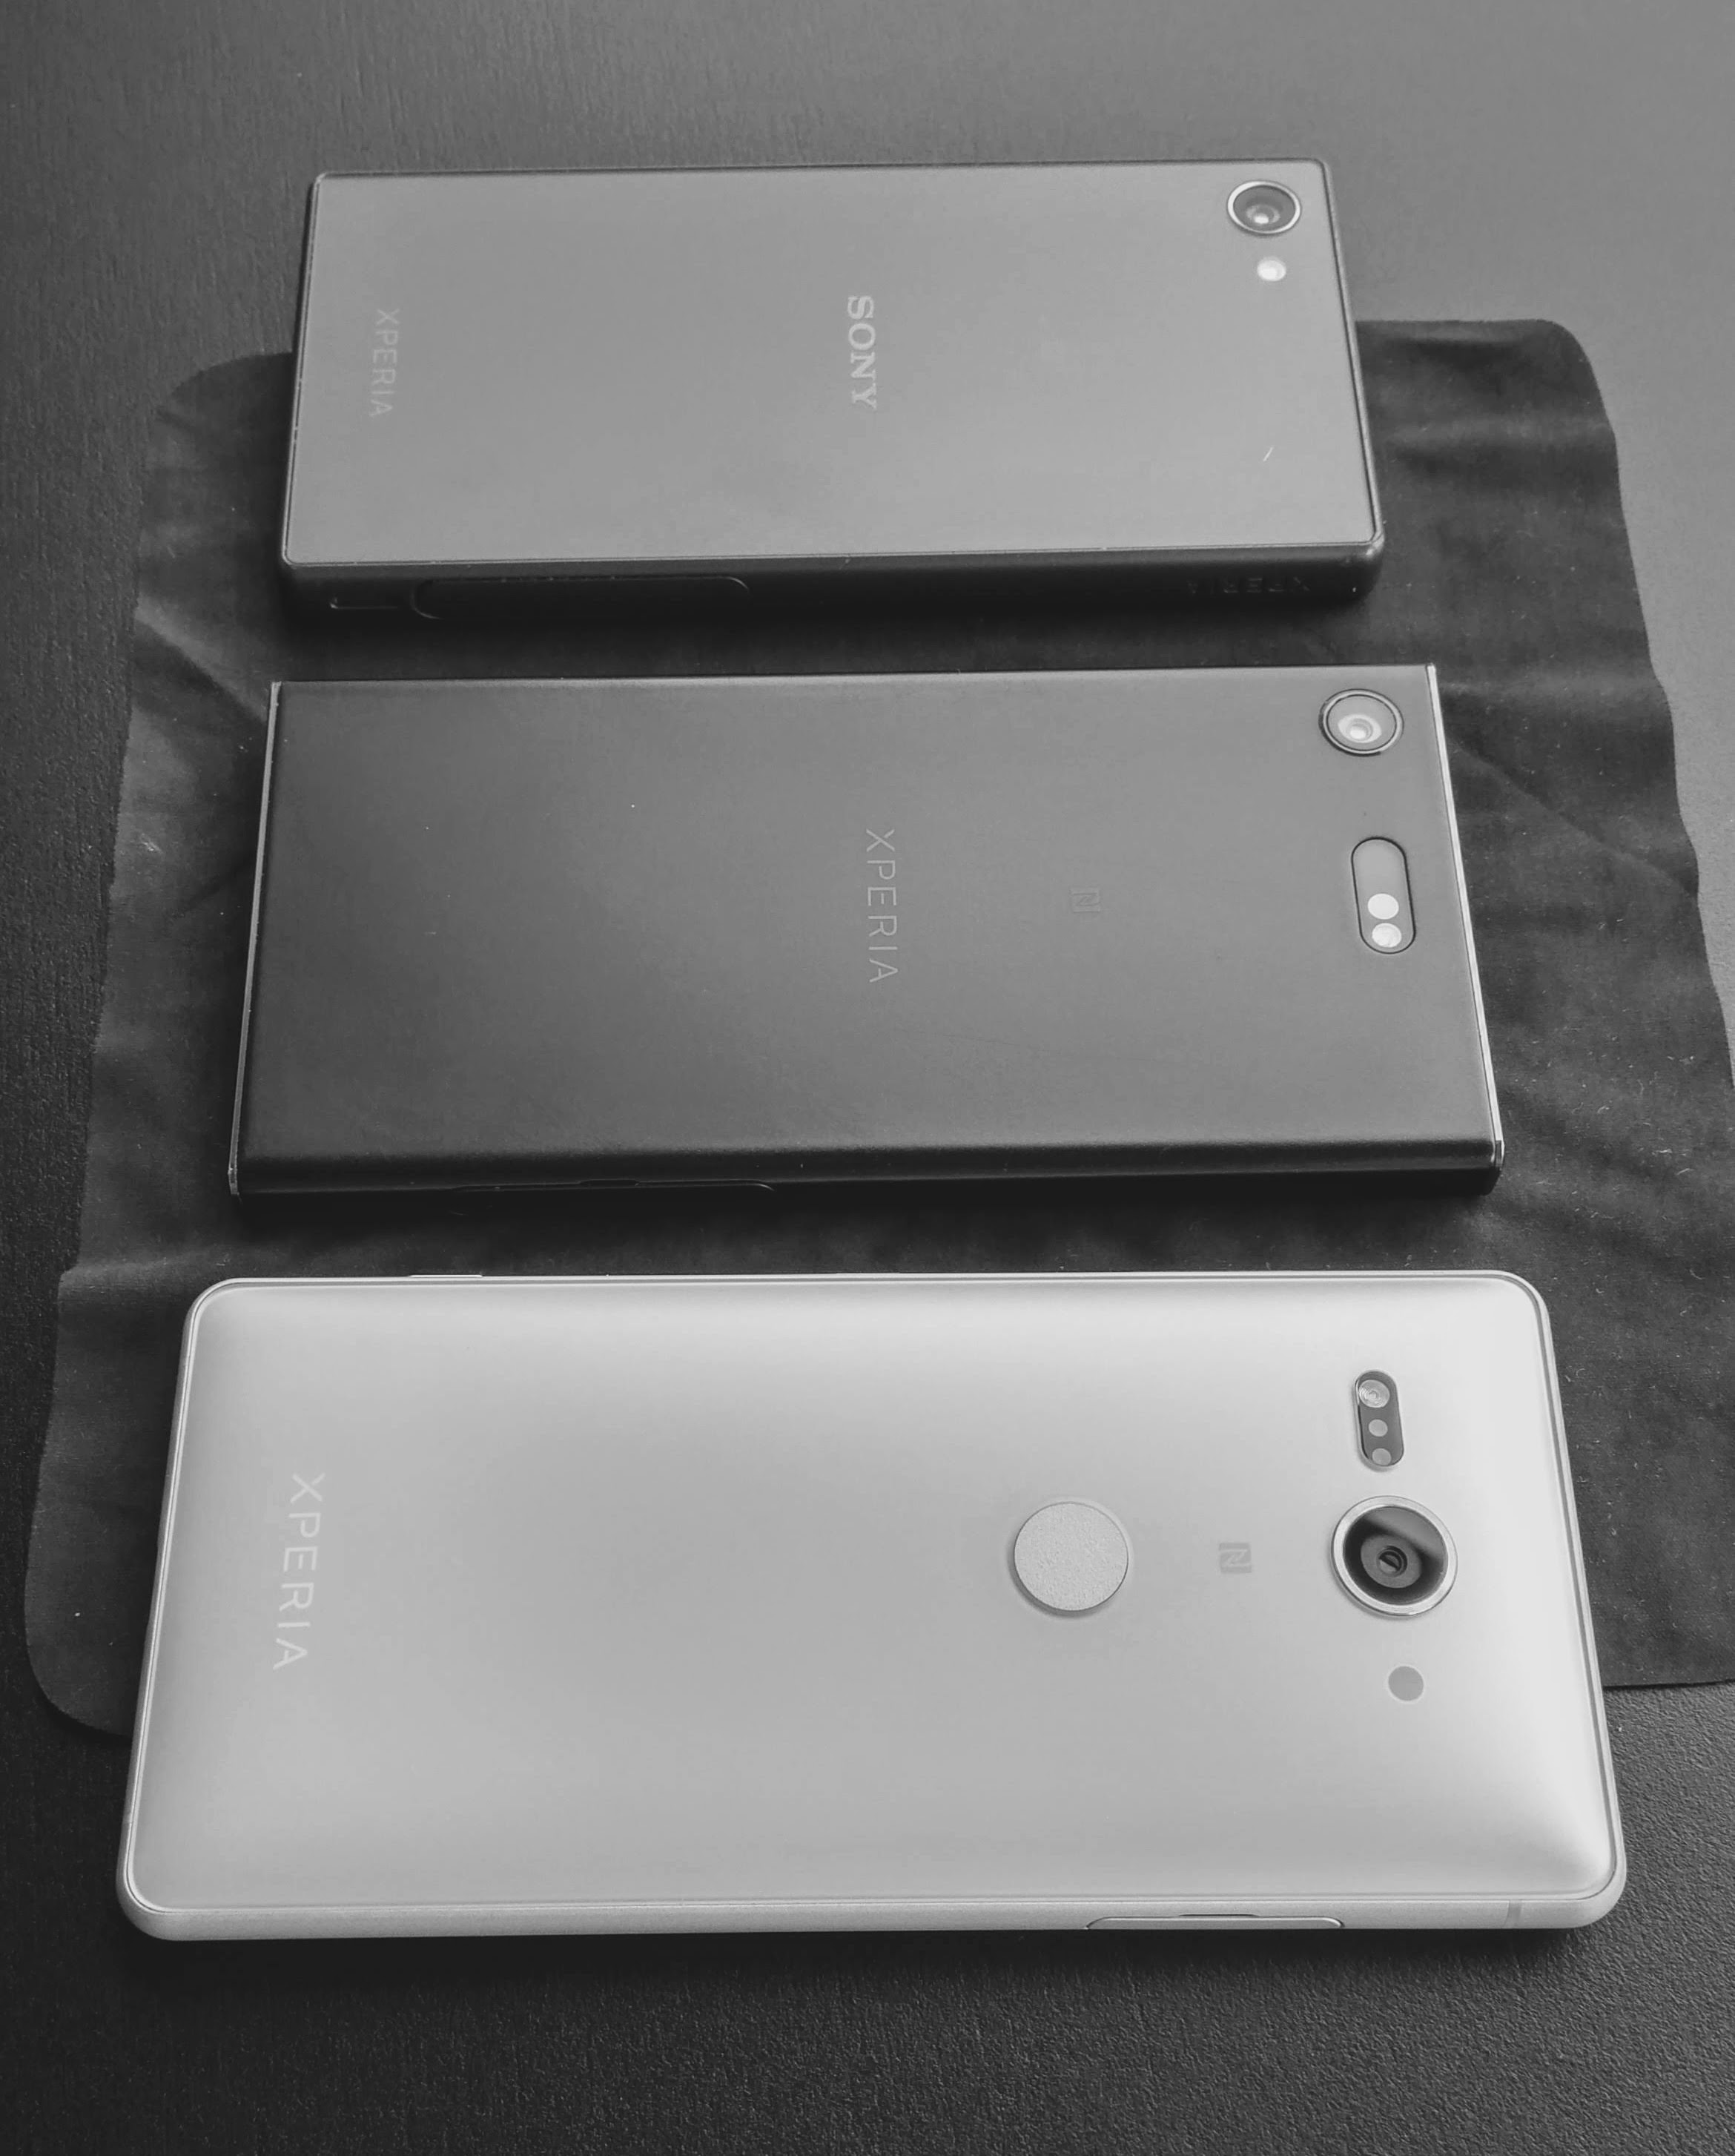 Sony Xperia Compact